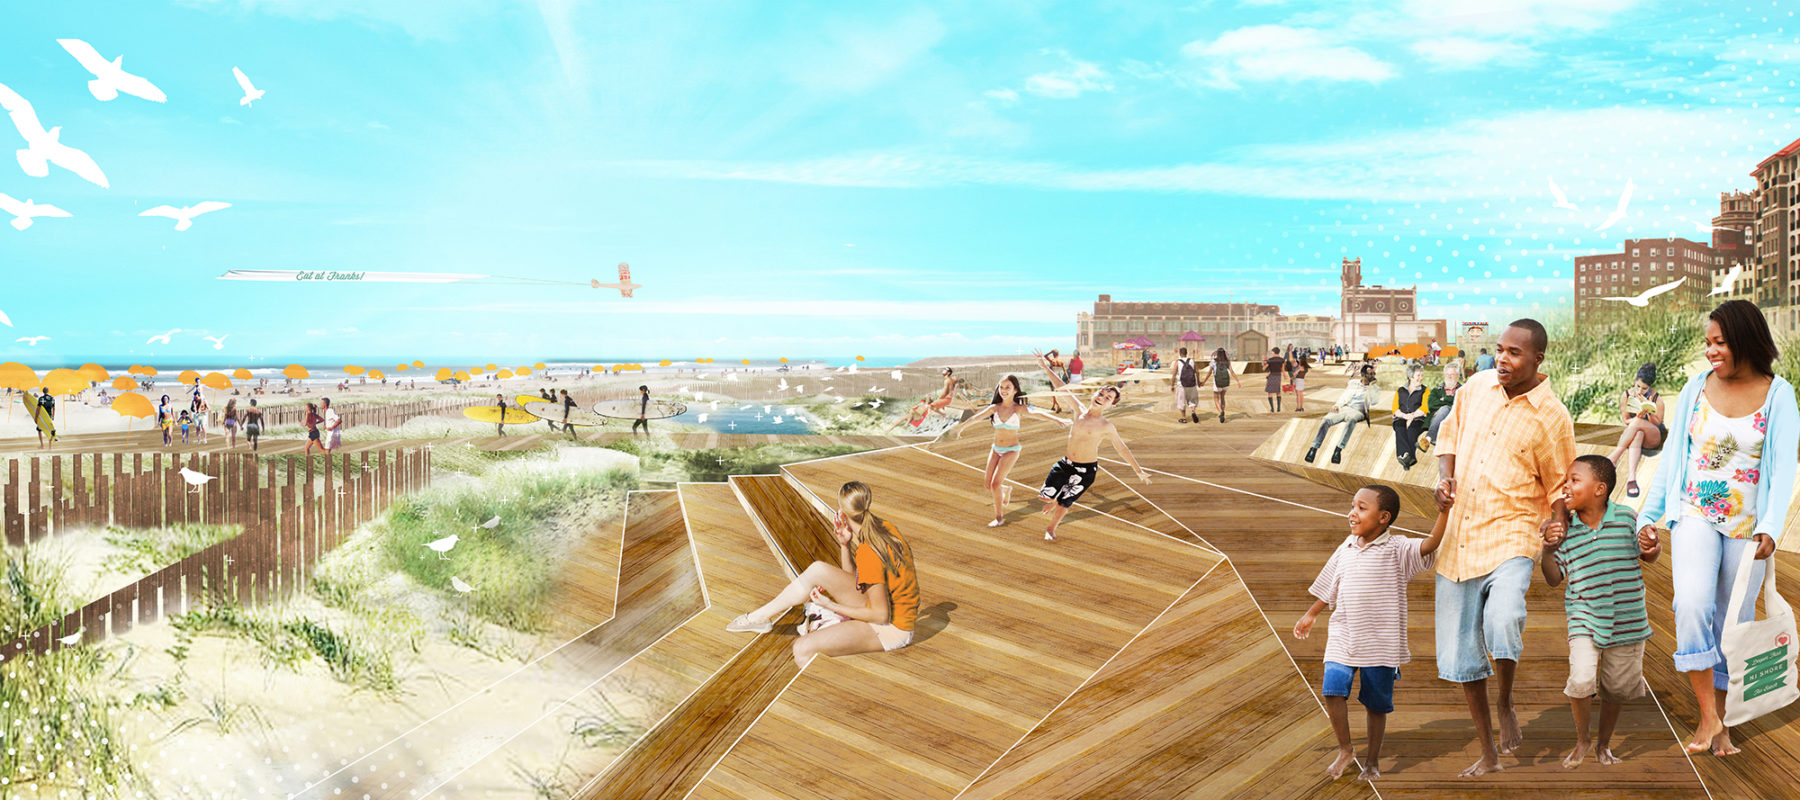 Rendering of vision for Ashbury with people on the boardwalk. A family holding hands walks along the boardwalk